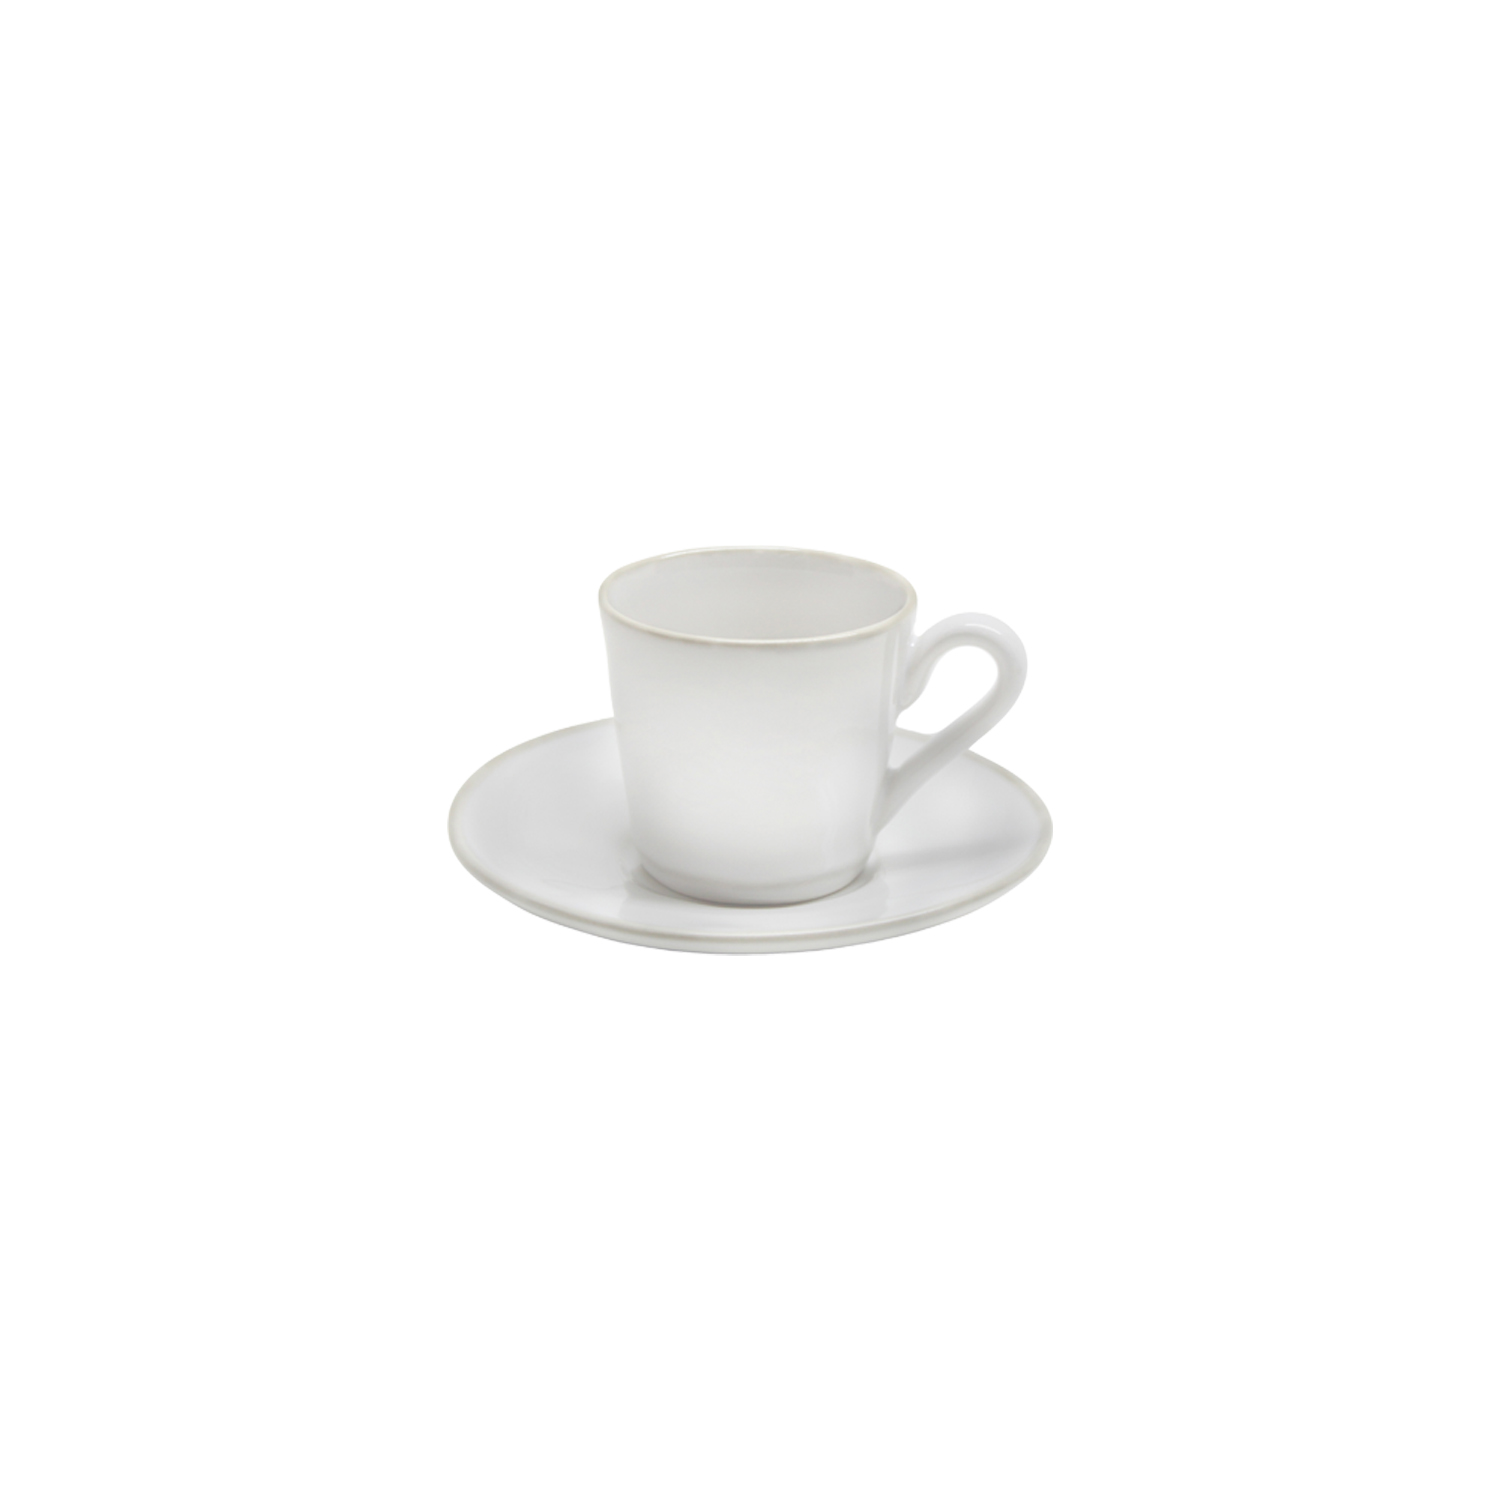 Beja White/cream Coffee Cup & Saucer 0.08l Gift